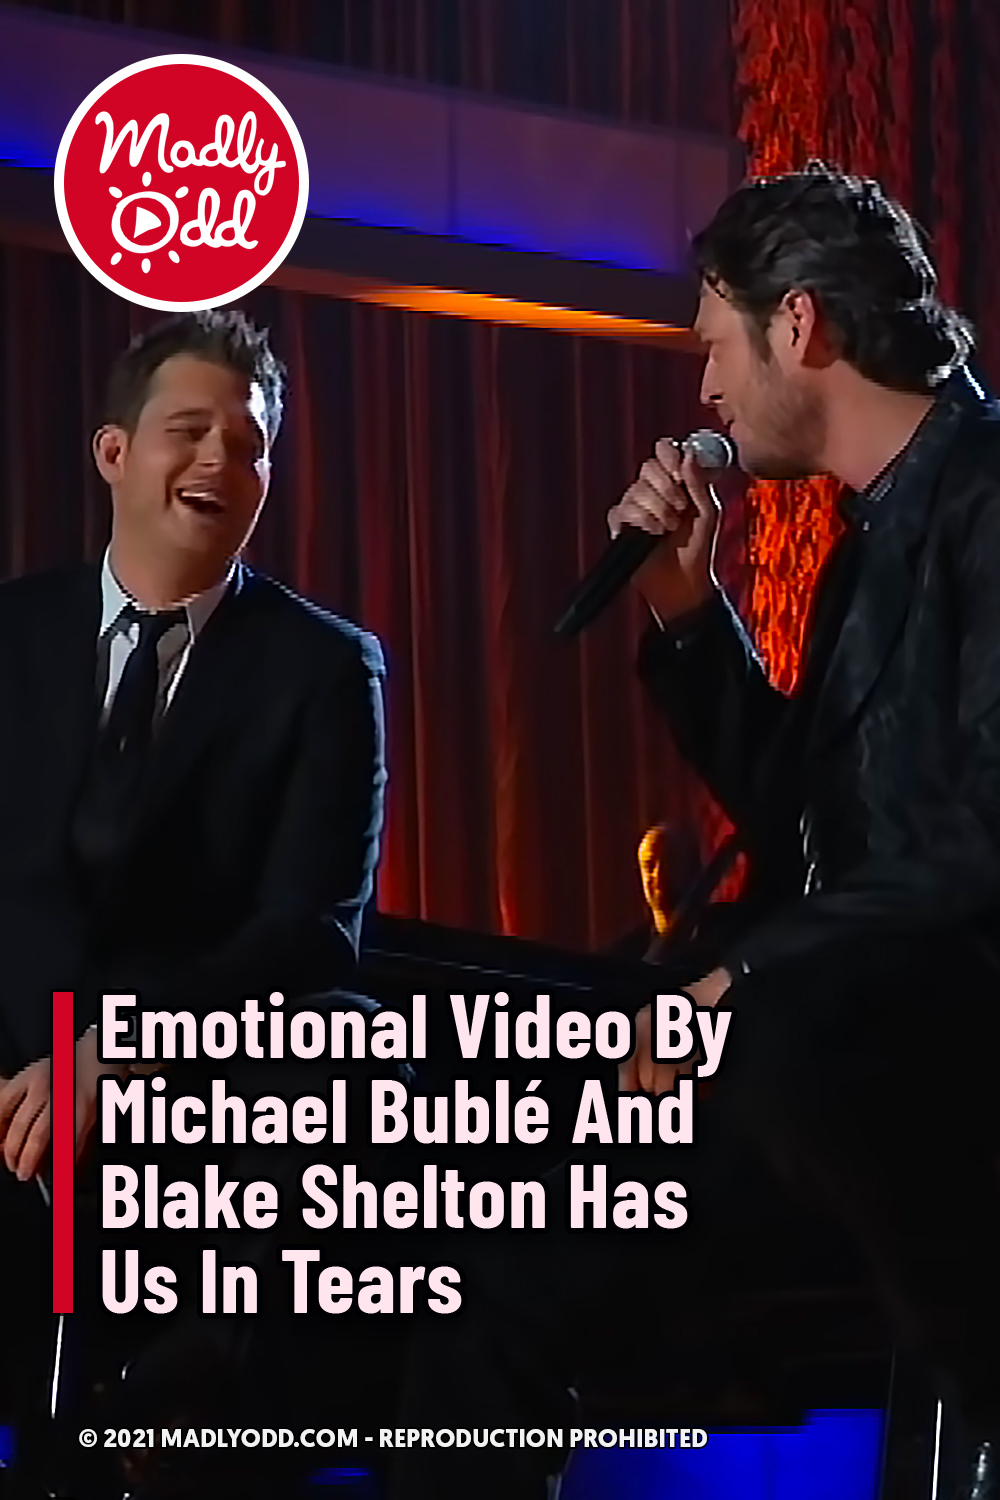 Emotional Video By Michael Bublé And Blake Shelton Has Us In Tears